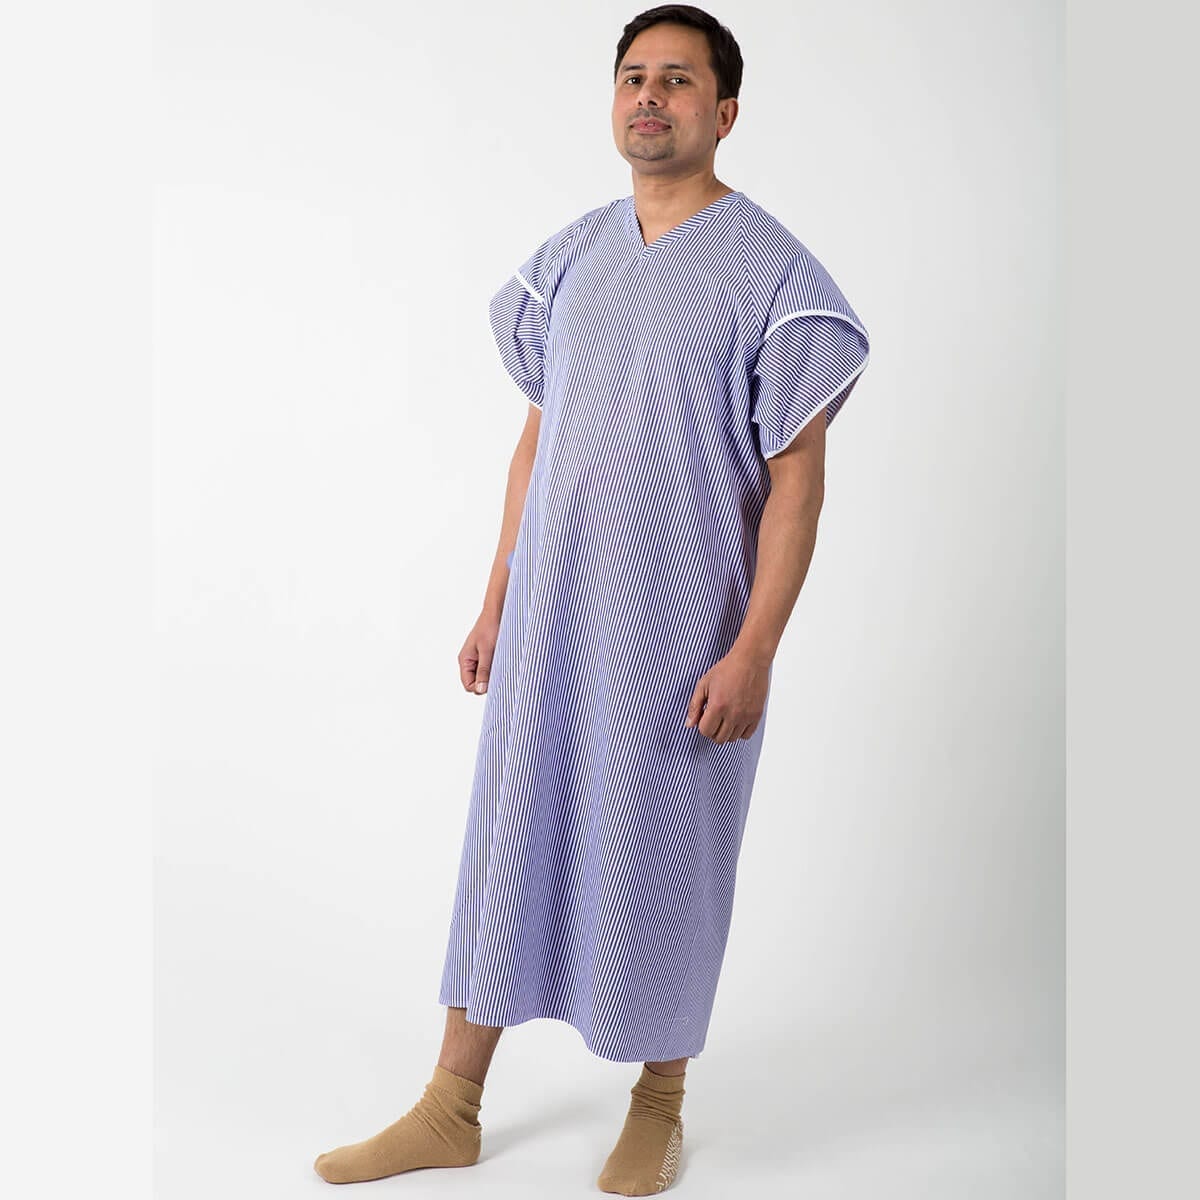 Hospital dignity gown - front view, tied at back